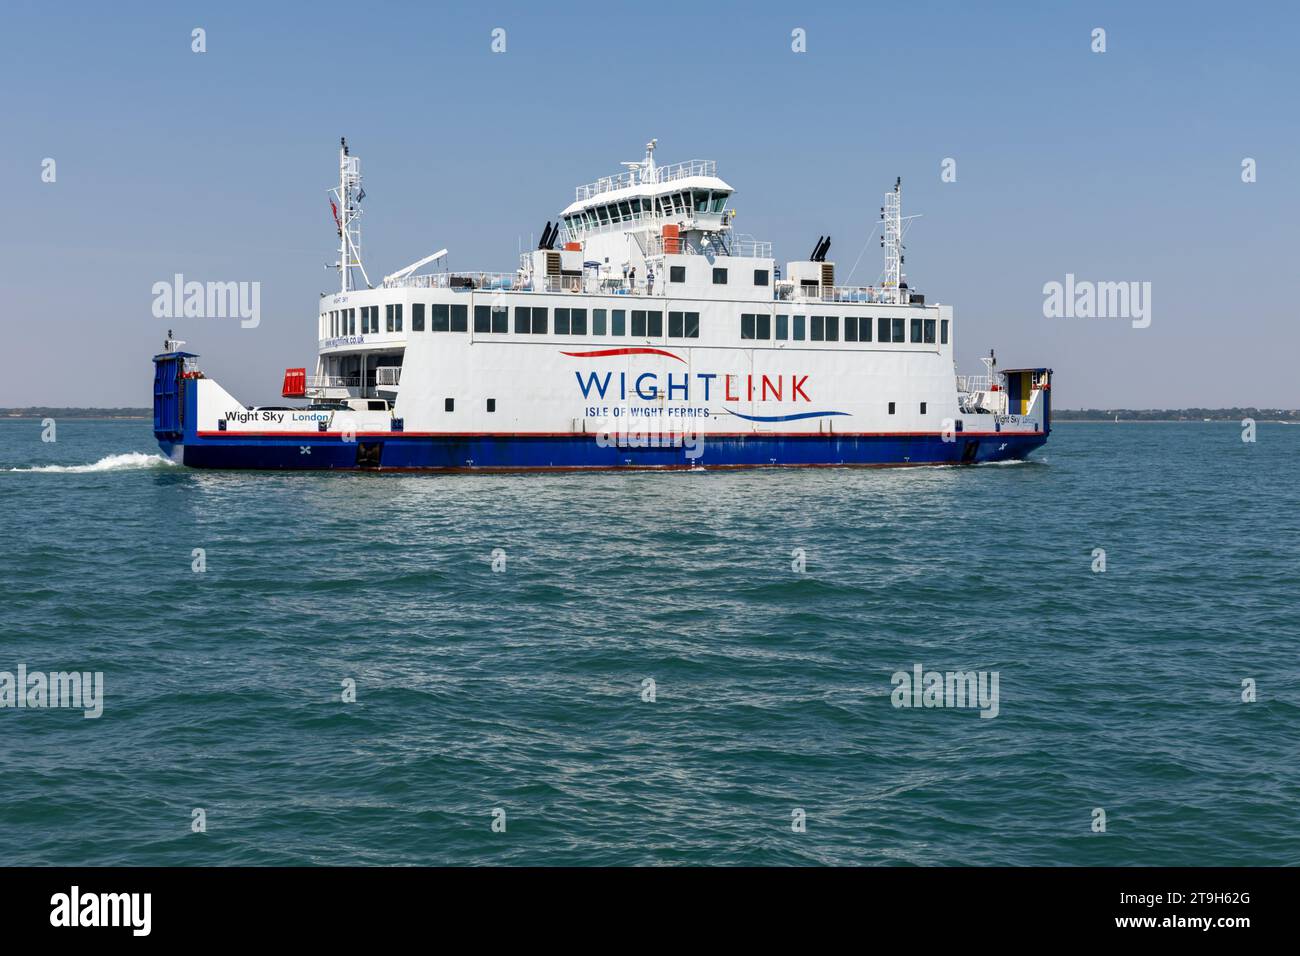 Isle of Wight Ferry crossing The Solent Stock Photo